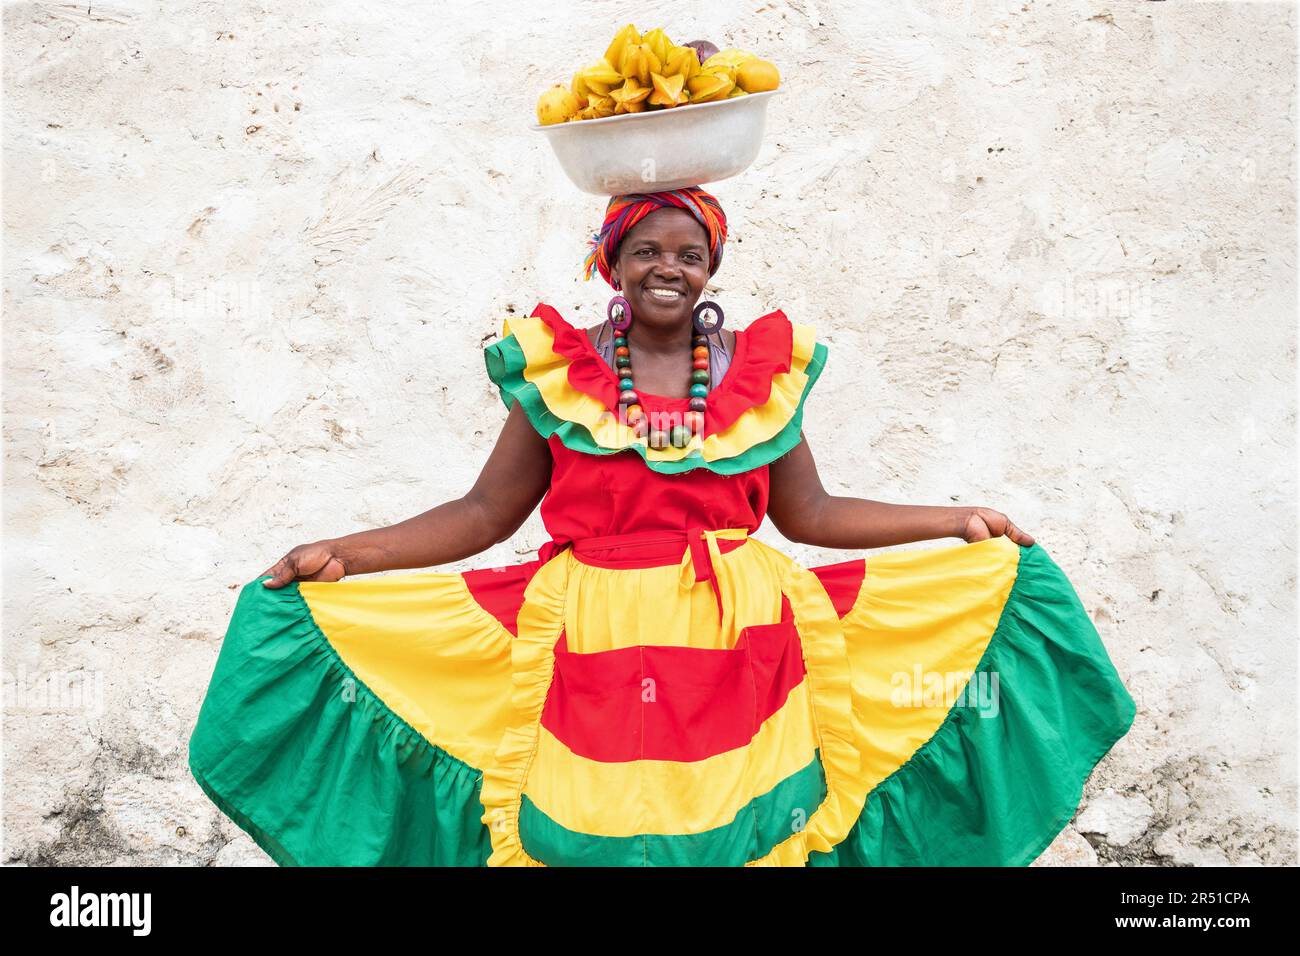 Cheerful fresh fruit street vendor aka Palenquera in the Old Town of Cartagena de Indias, Colombia. Afro-Colombian woman in traditional clothing. Stock Photo